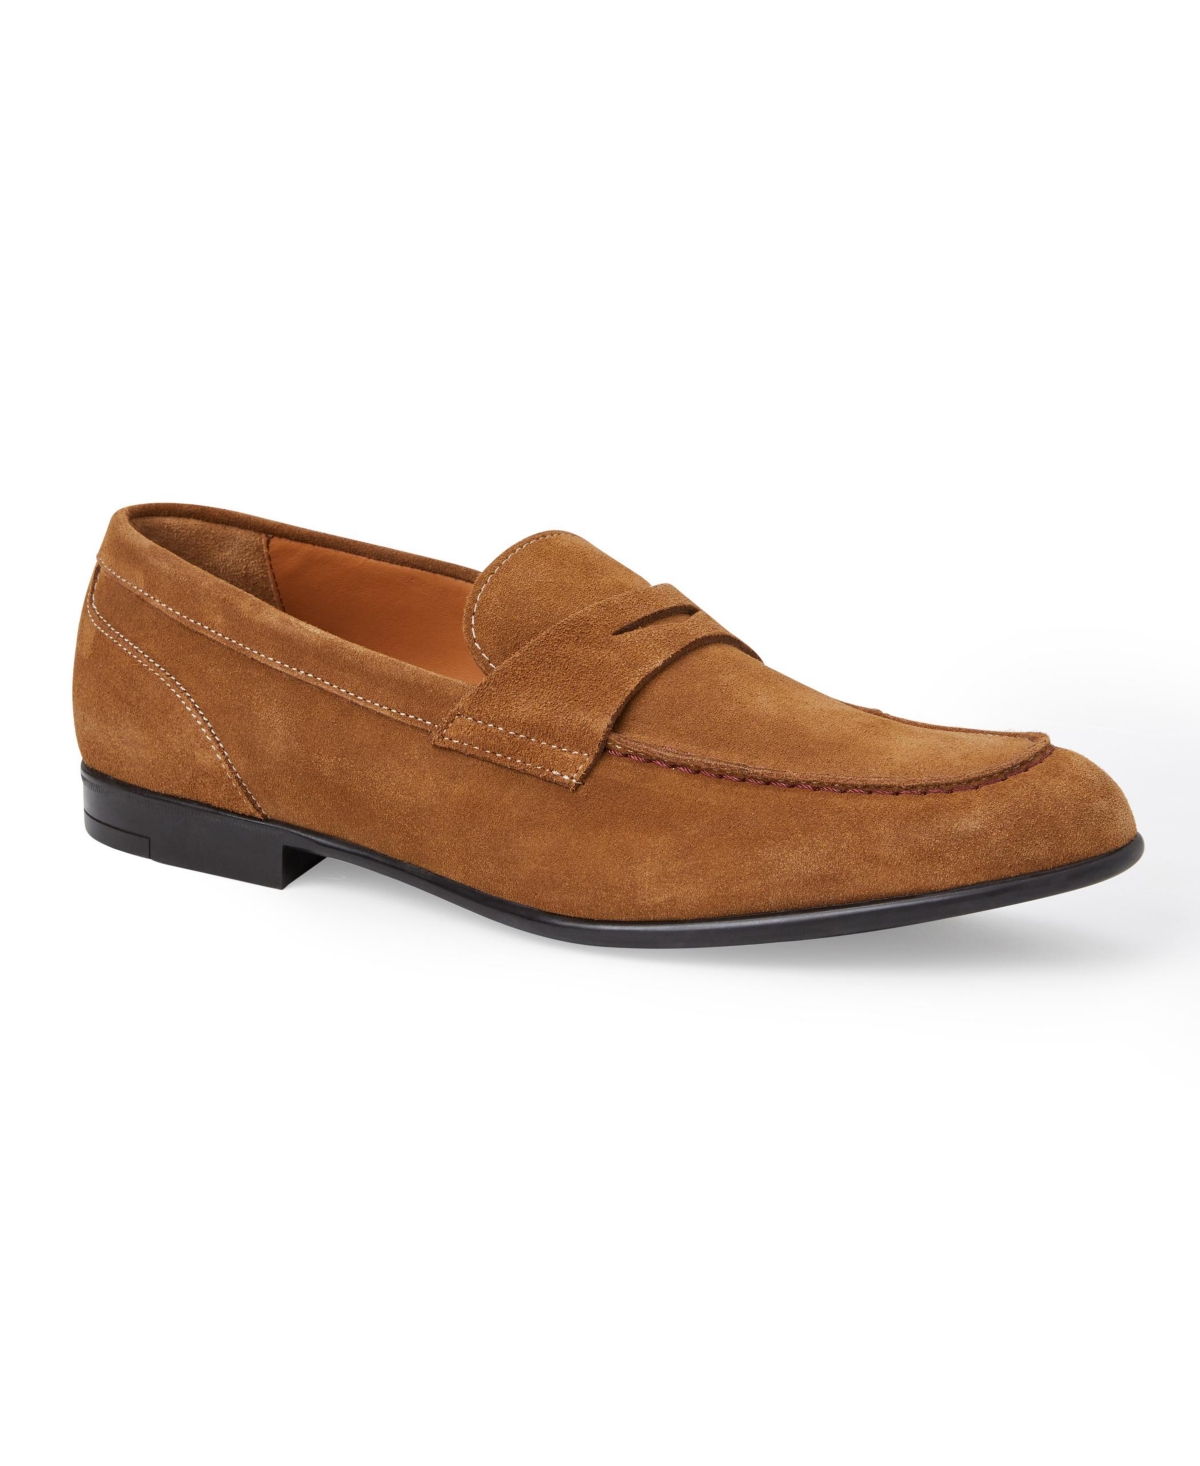 BRUNO MAGLI MEN'S SILAS LOAFERS MEN'S SHOES